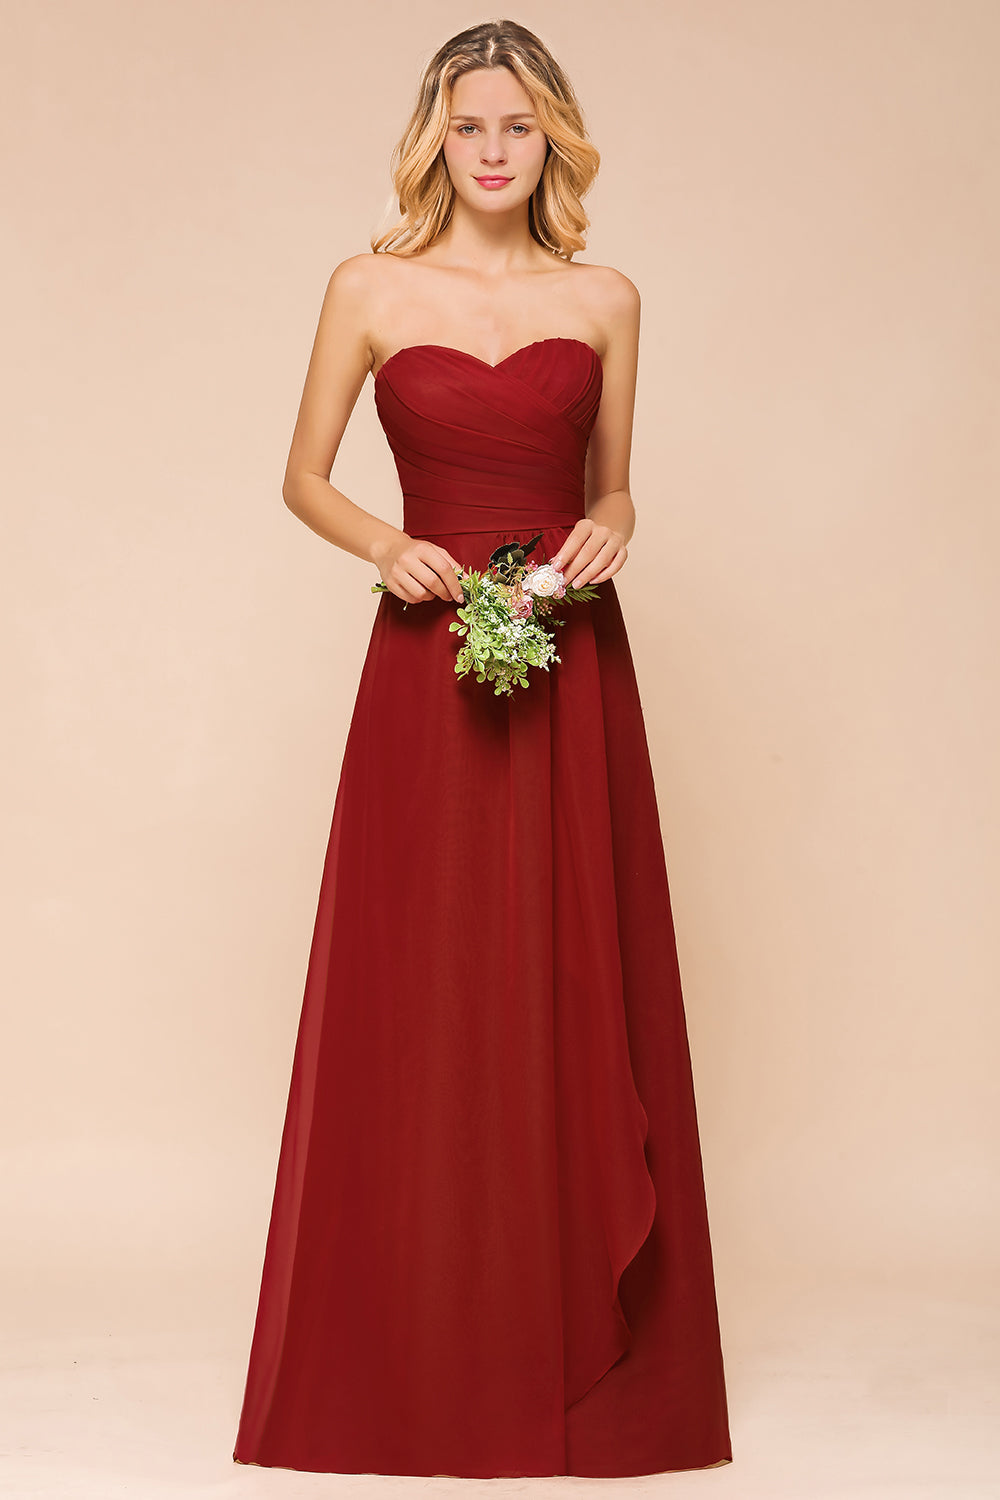 Gorgeous Sweetheart Strapless Rust Bridesmaid Dresses with Ruffle-27dress